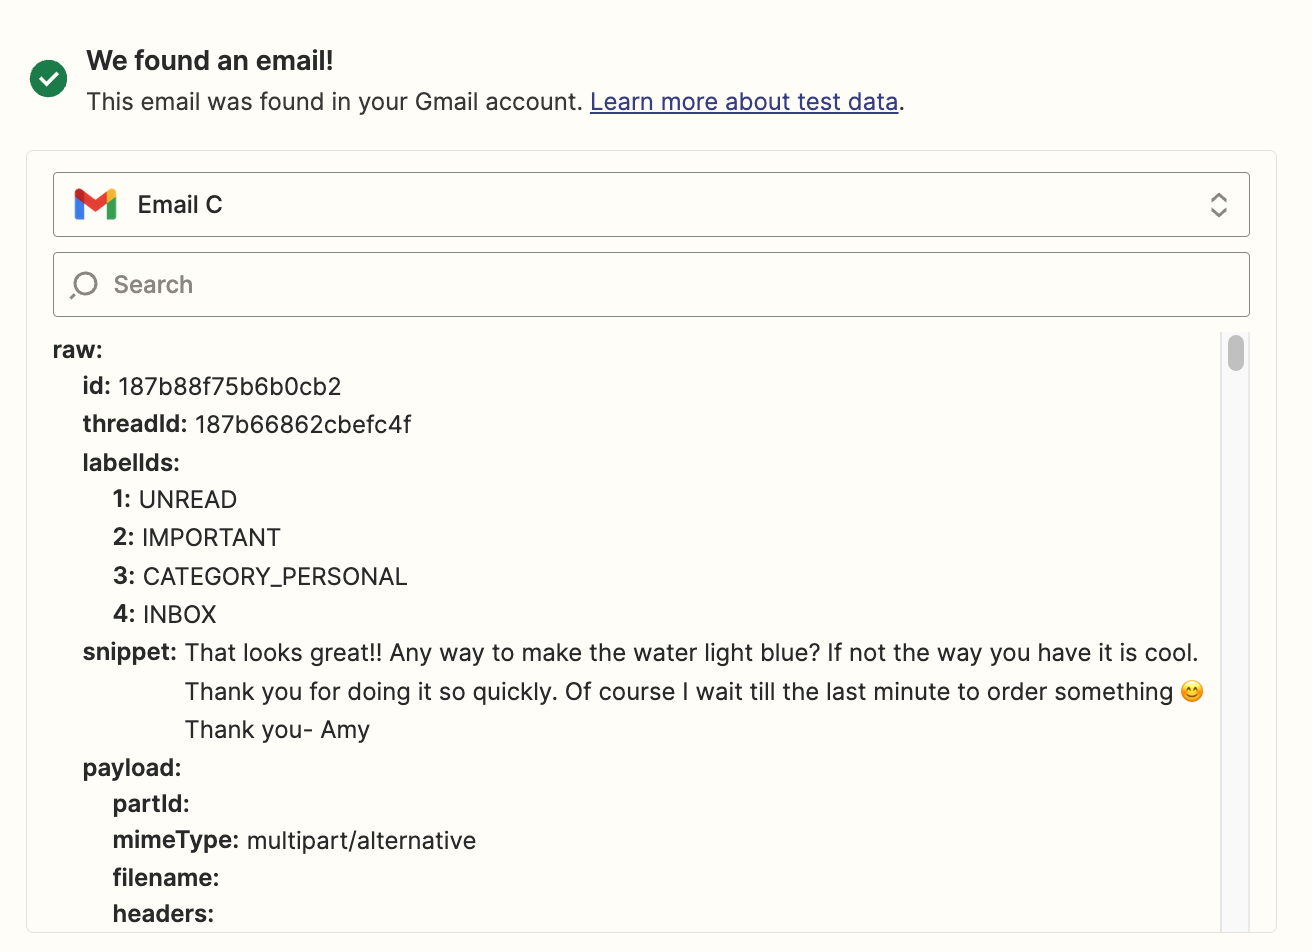 A successful test result that shows an email found in a Gmail inbox.